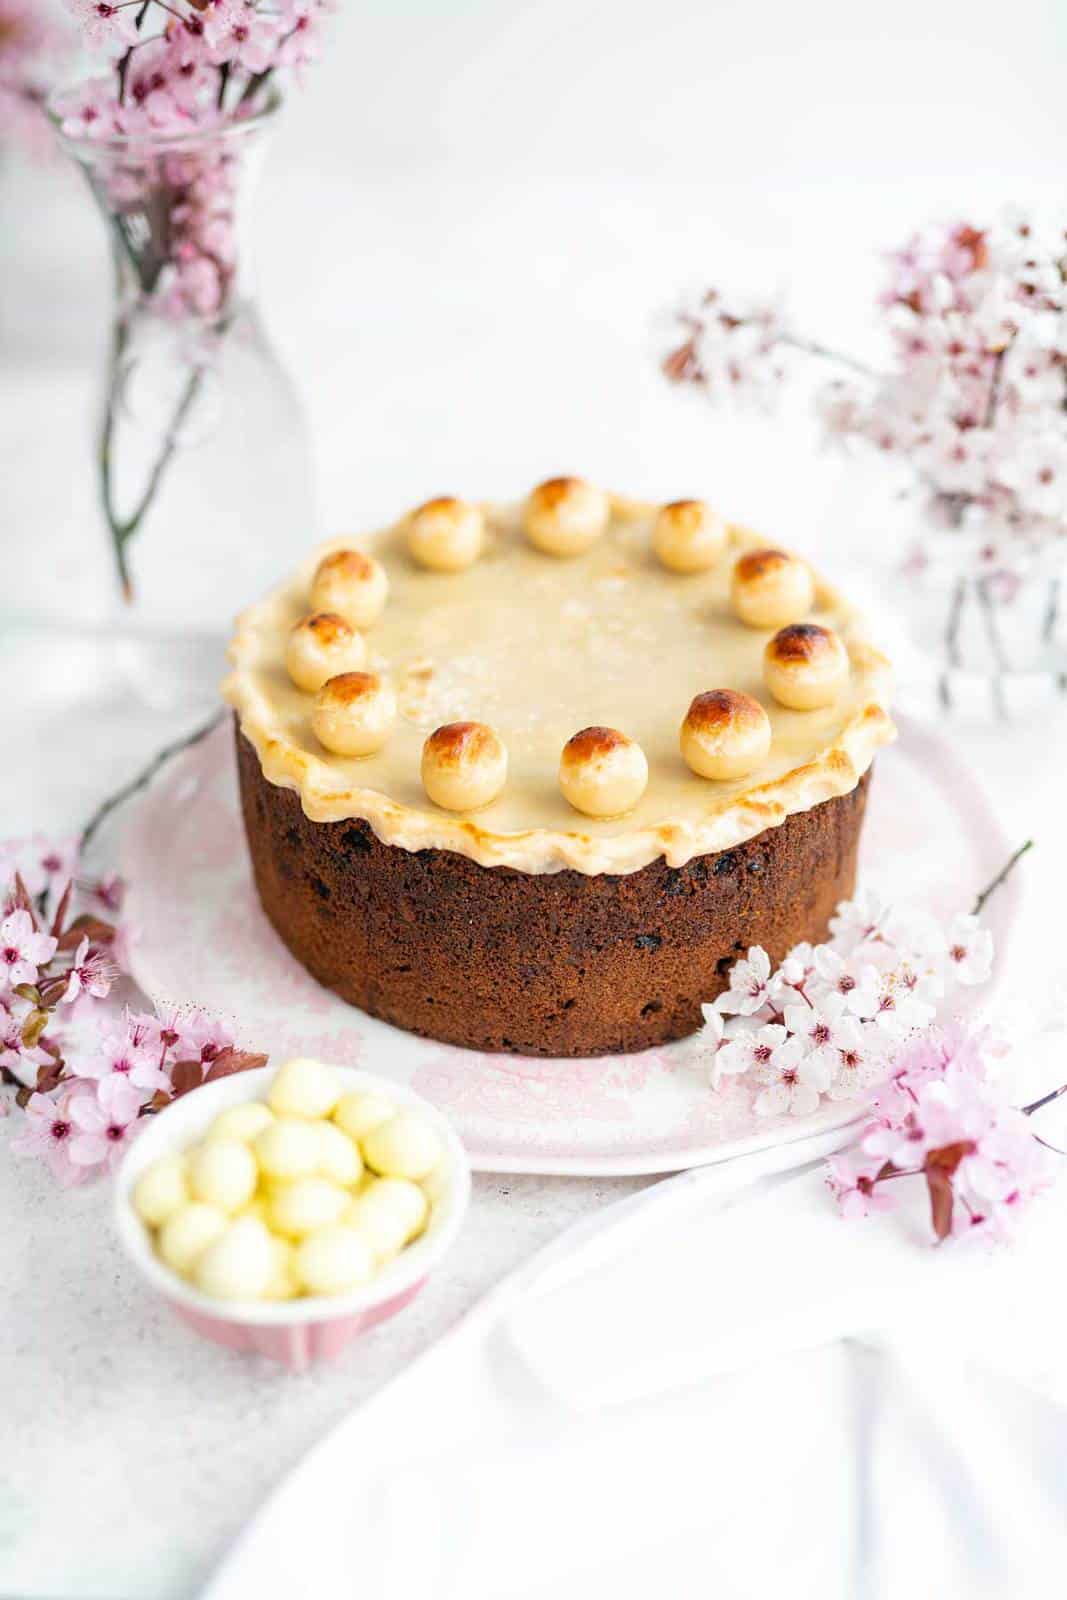 Easter Simnel Cake decorated with the traditional 11 marzipan balls